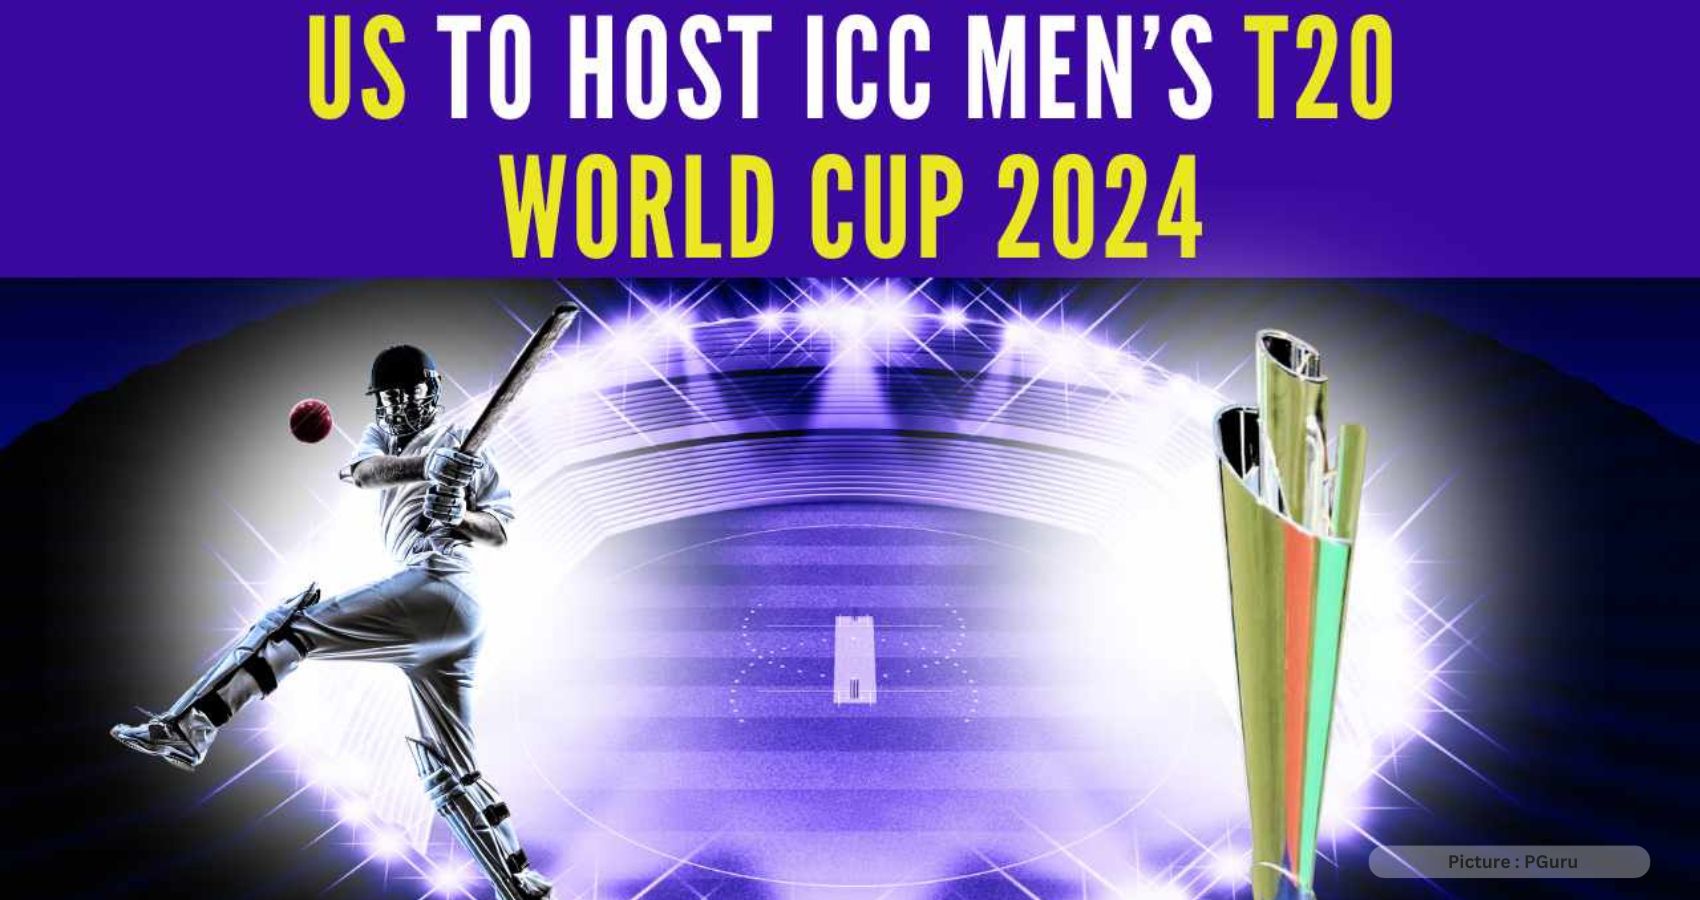 USA to host 2024 ICC Mens T20 World Cup